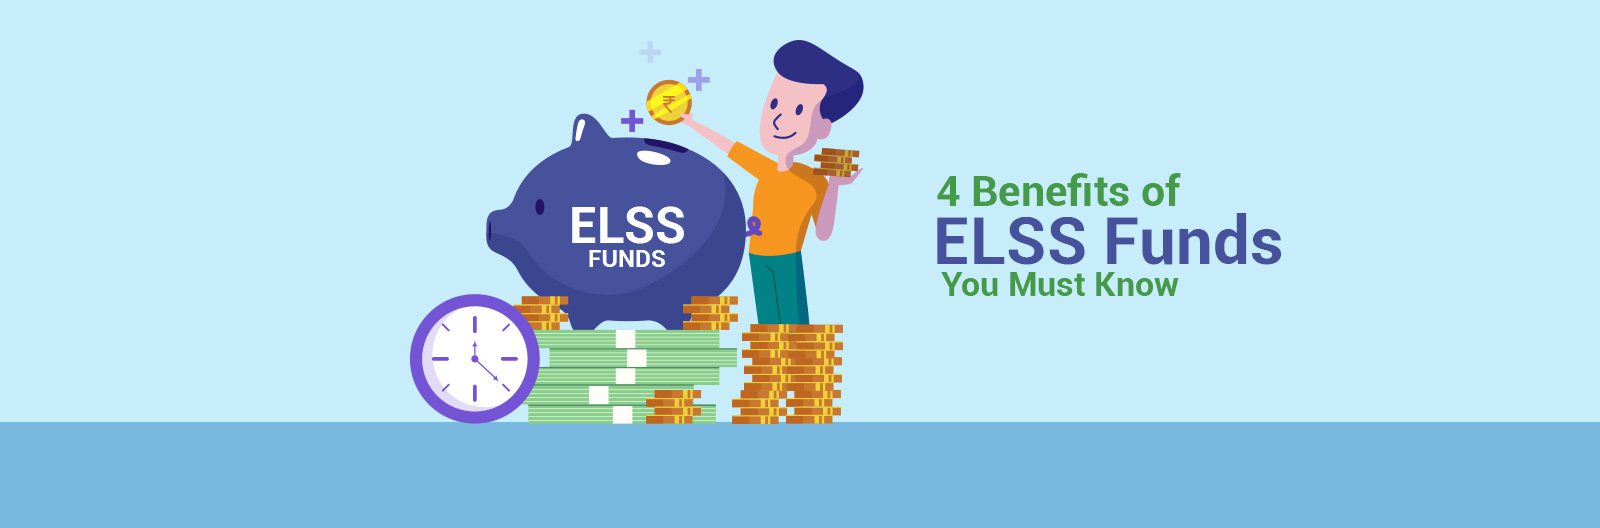 4 benefits of elss funds that are essential to keep in mind